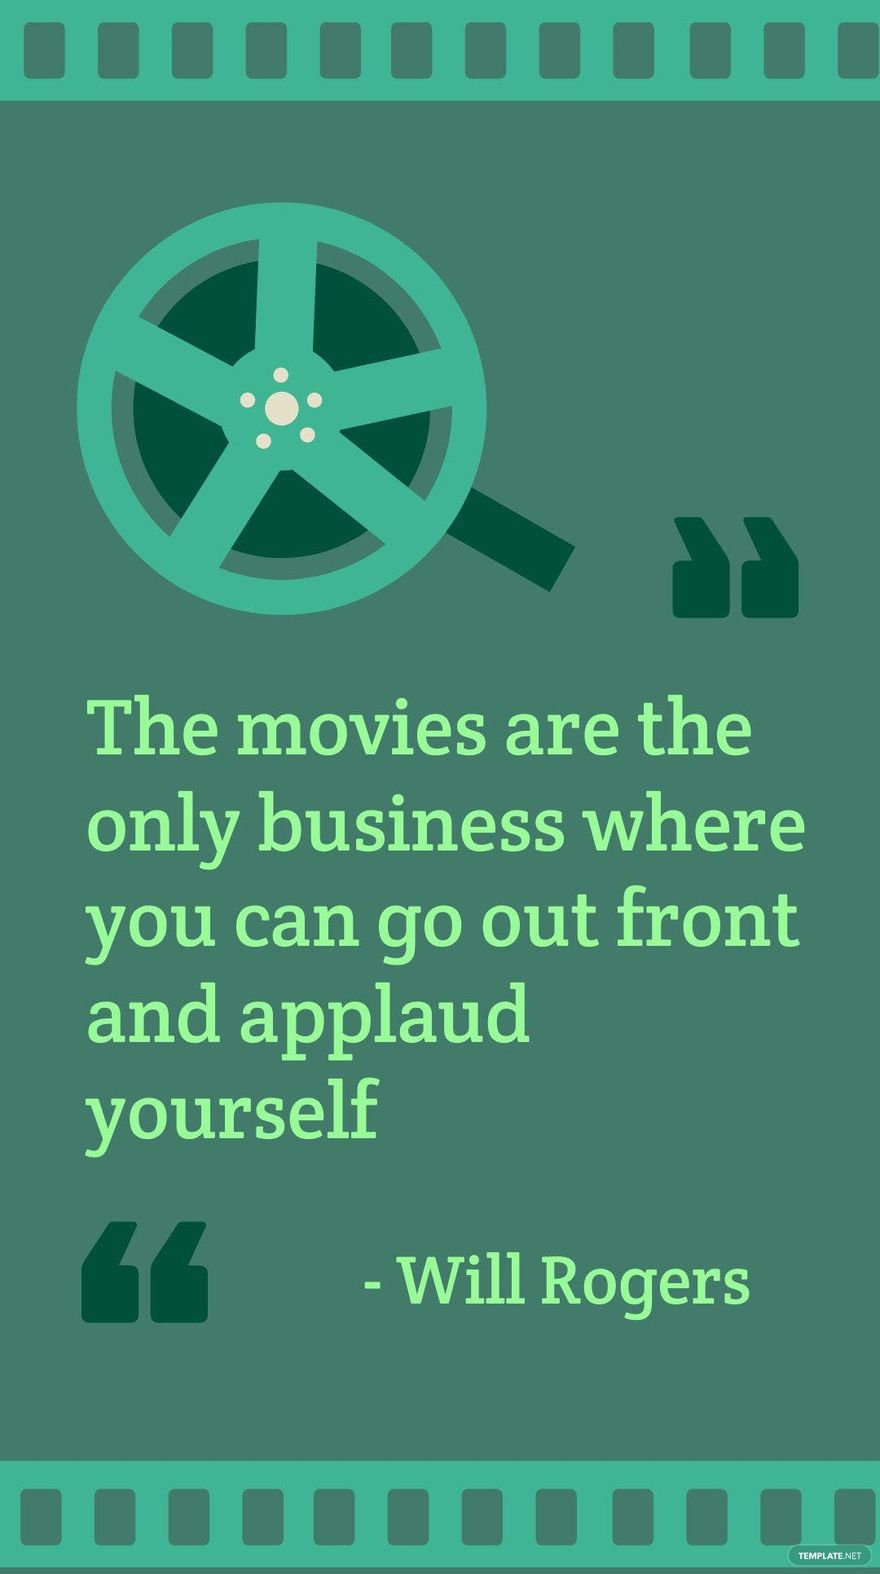 Free Will Rogers -The movies are the only business where you can go out front and applaud yourself in JPG